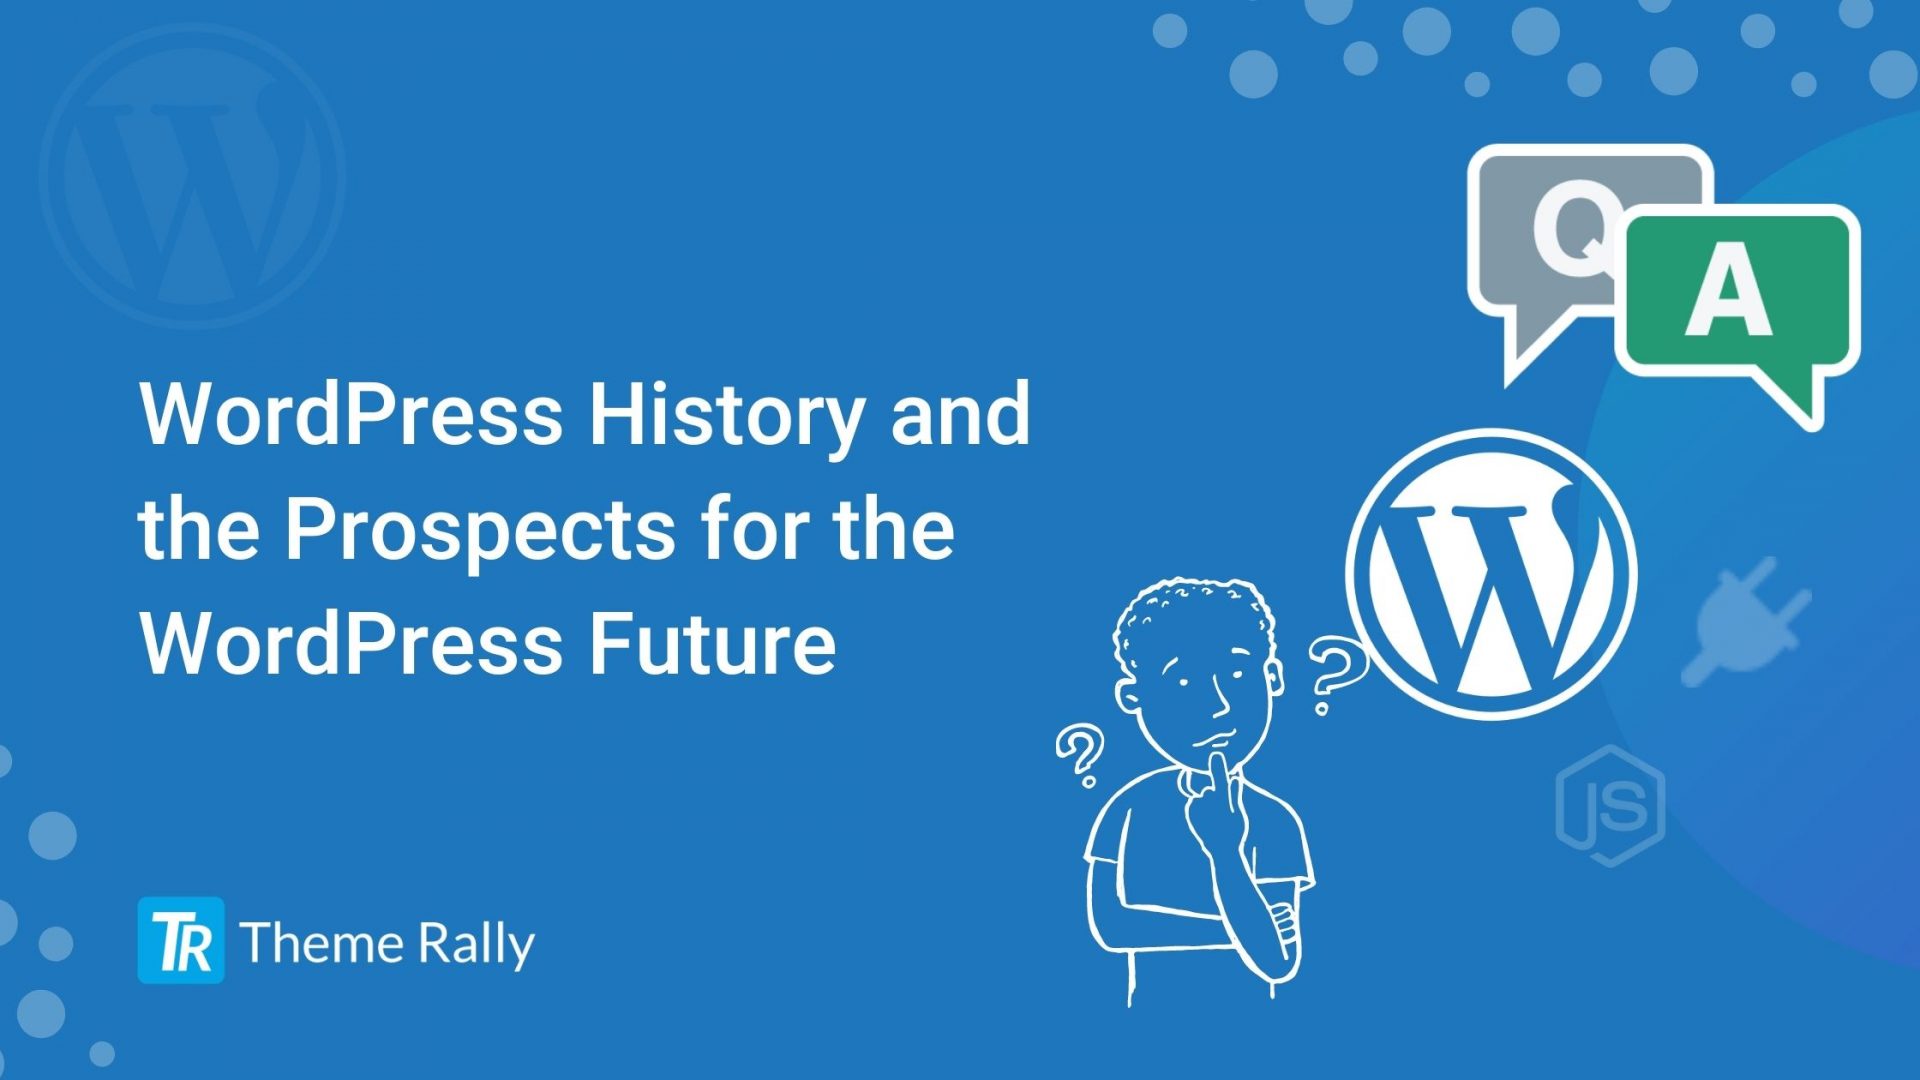 WordPress History and the prospects for the WordPress Future